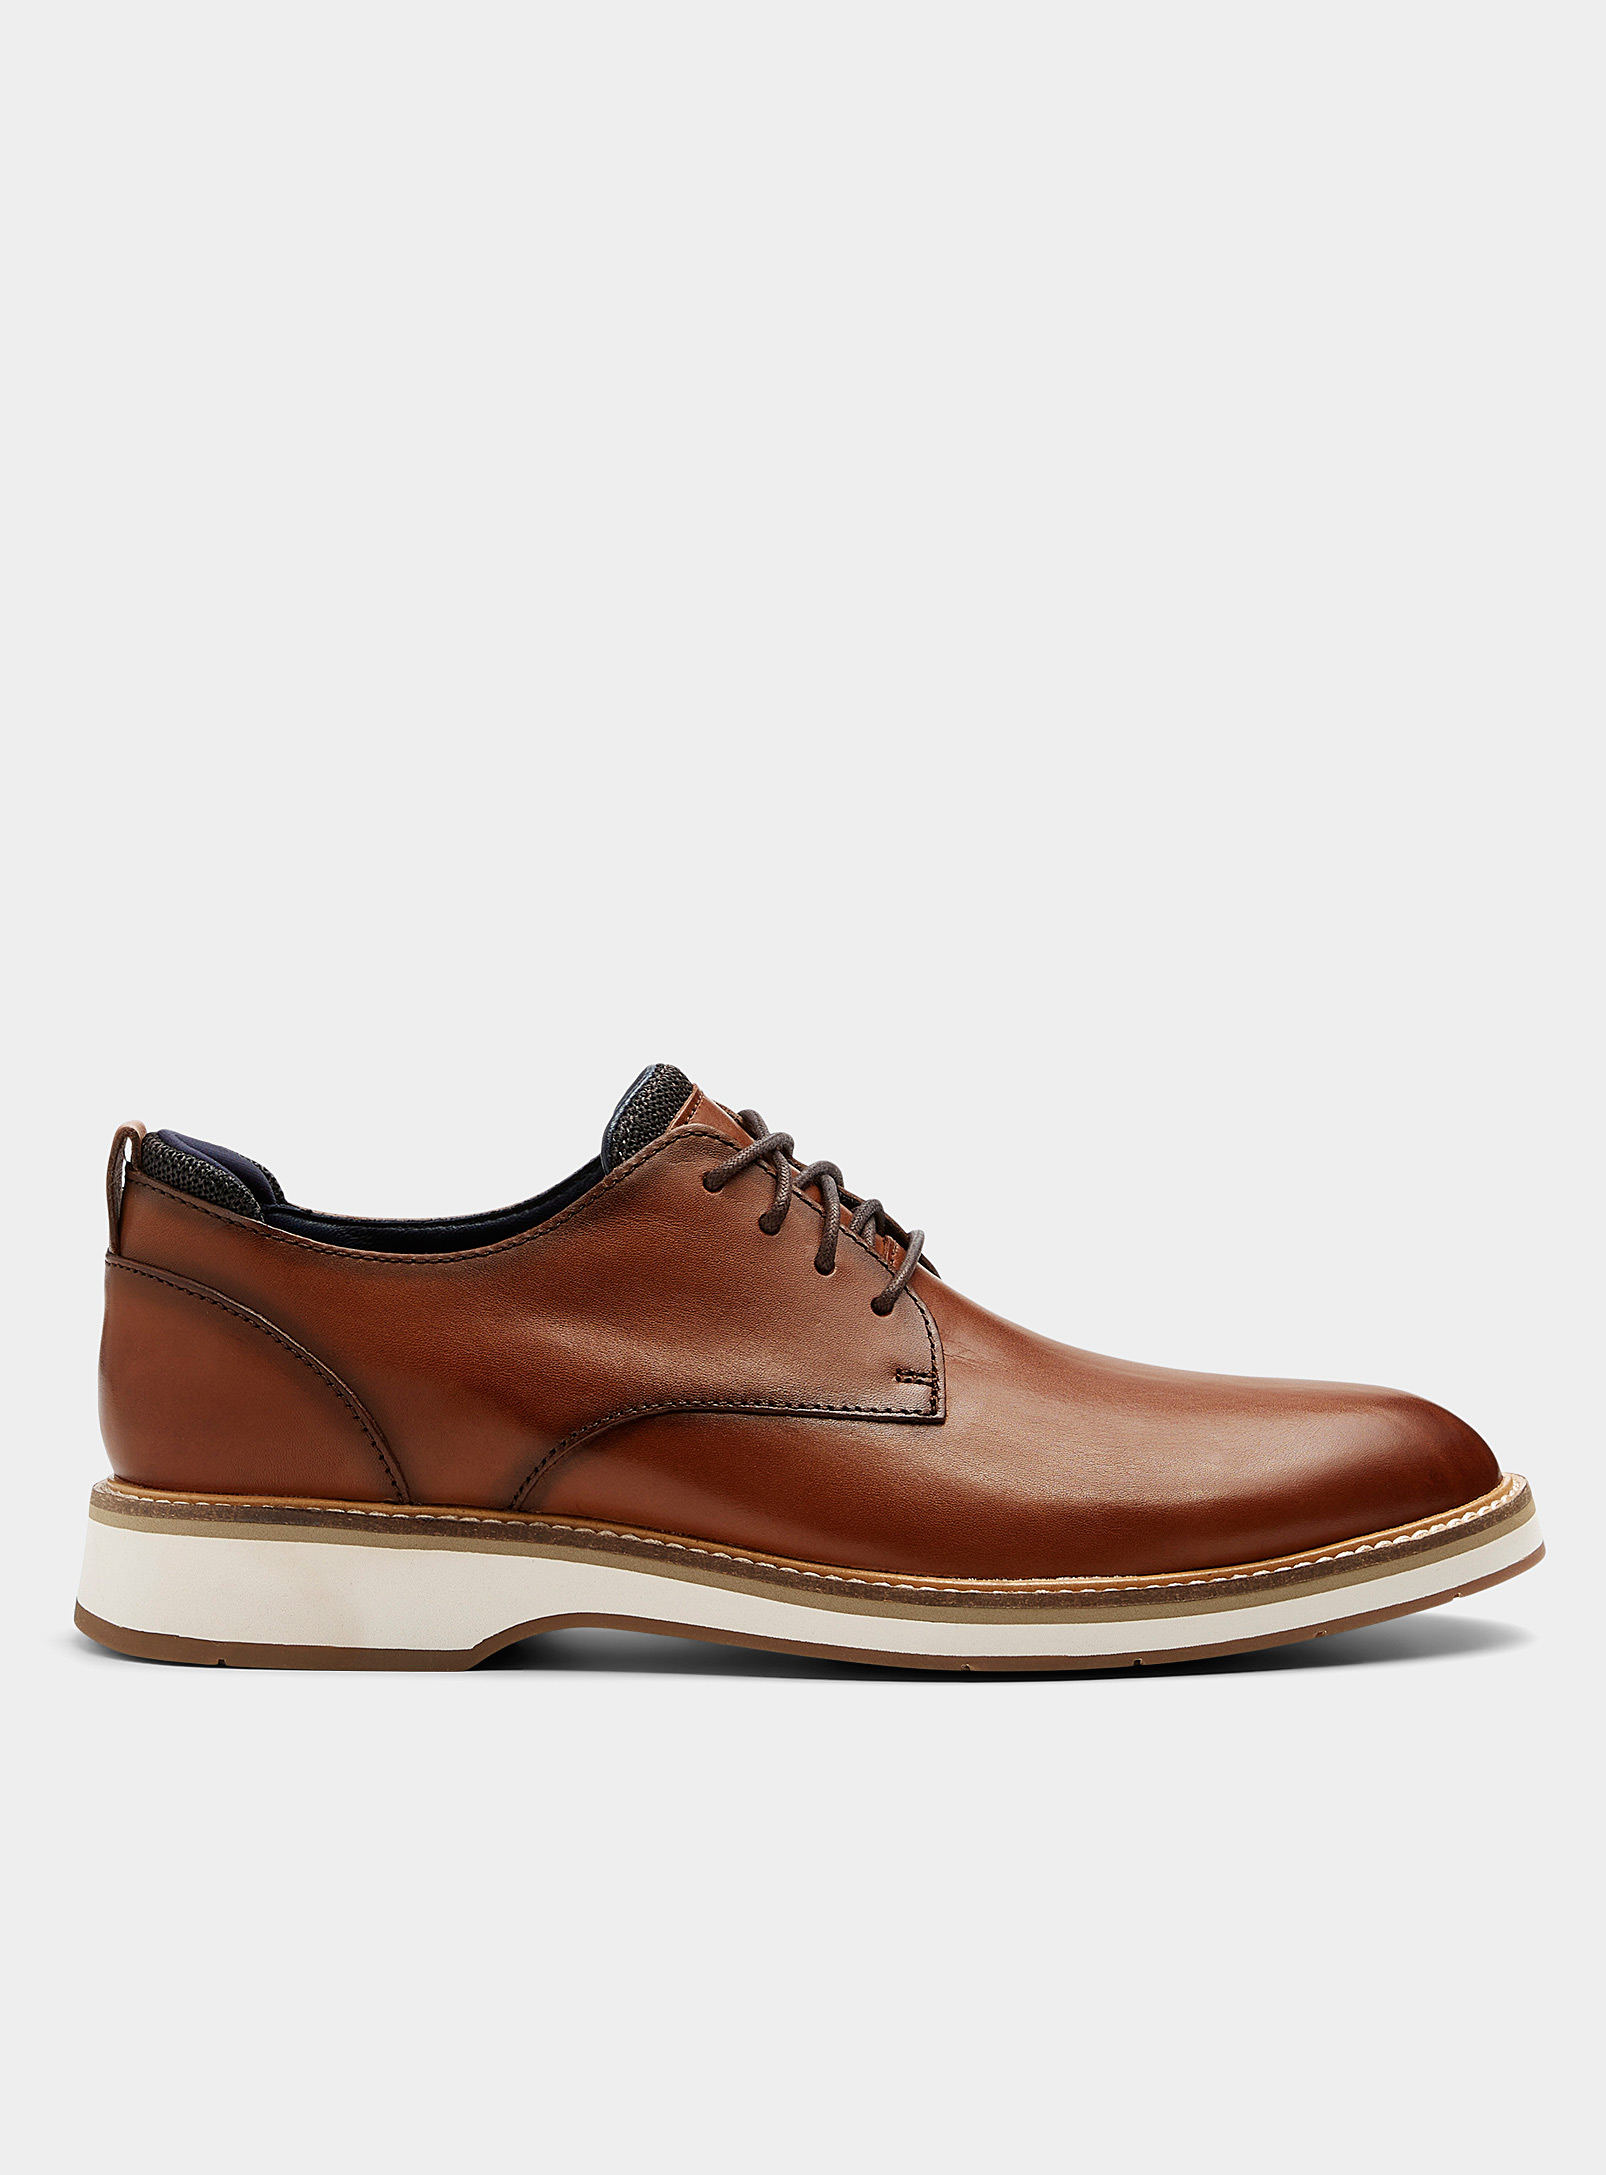 Chaussures ' Cole Haan